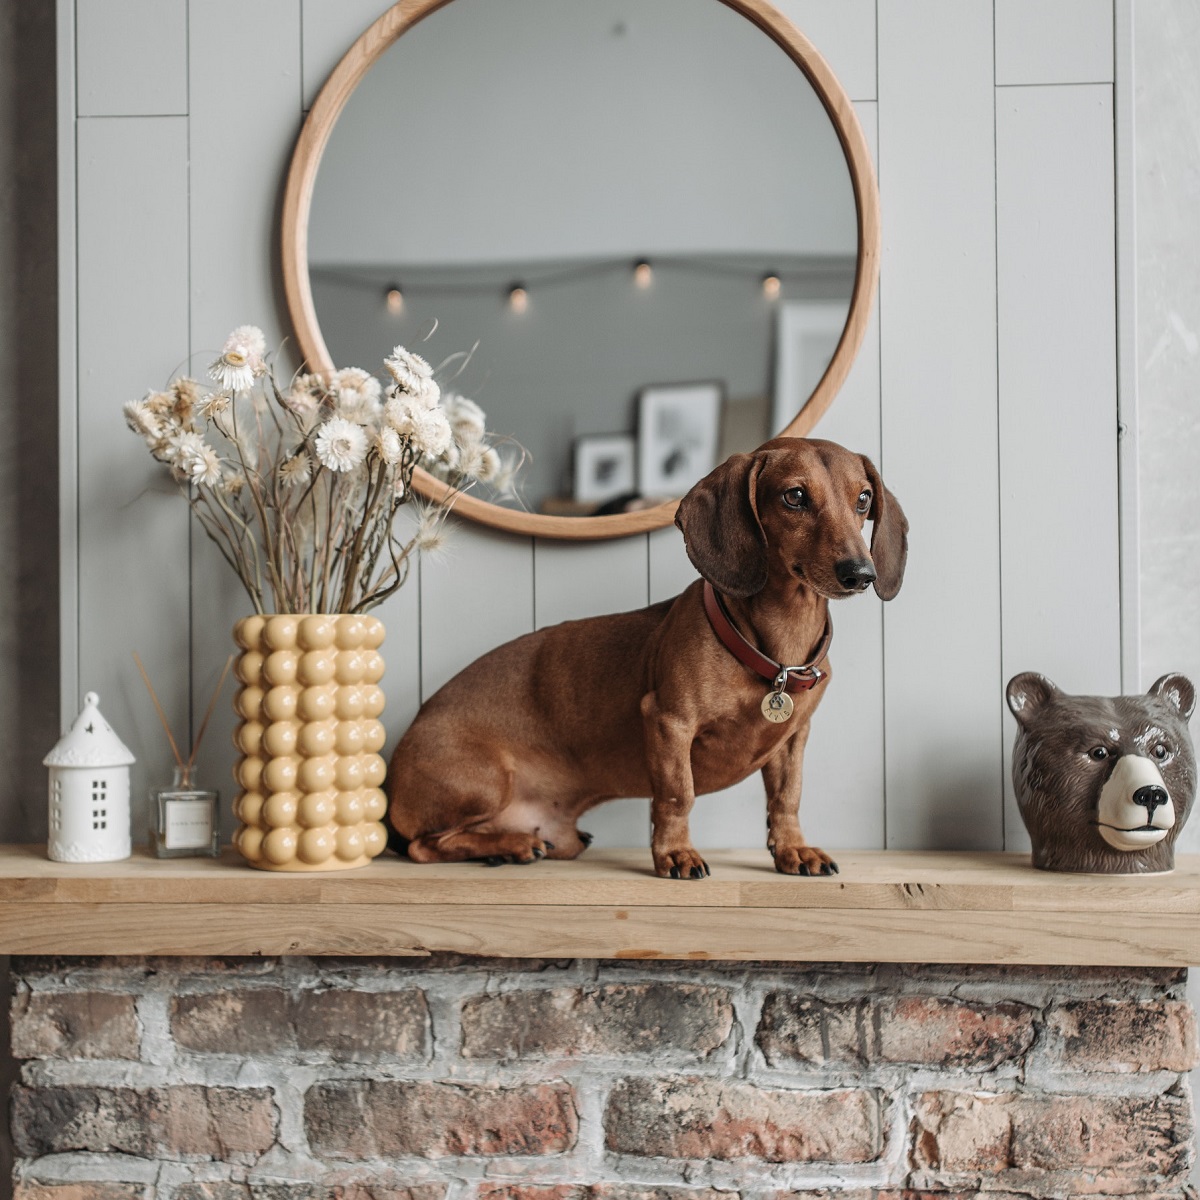 dachshund-dog-seated-atop-a-wooden-mantel-next-to-a-flower-pot-over-a-brick-fireplace